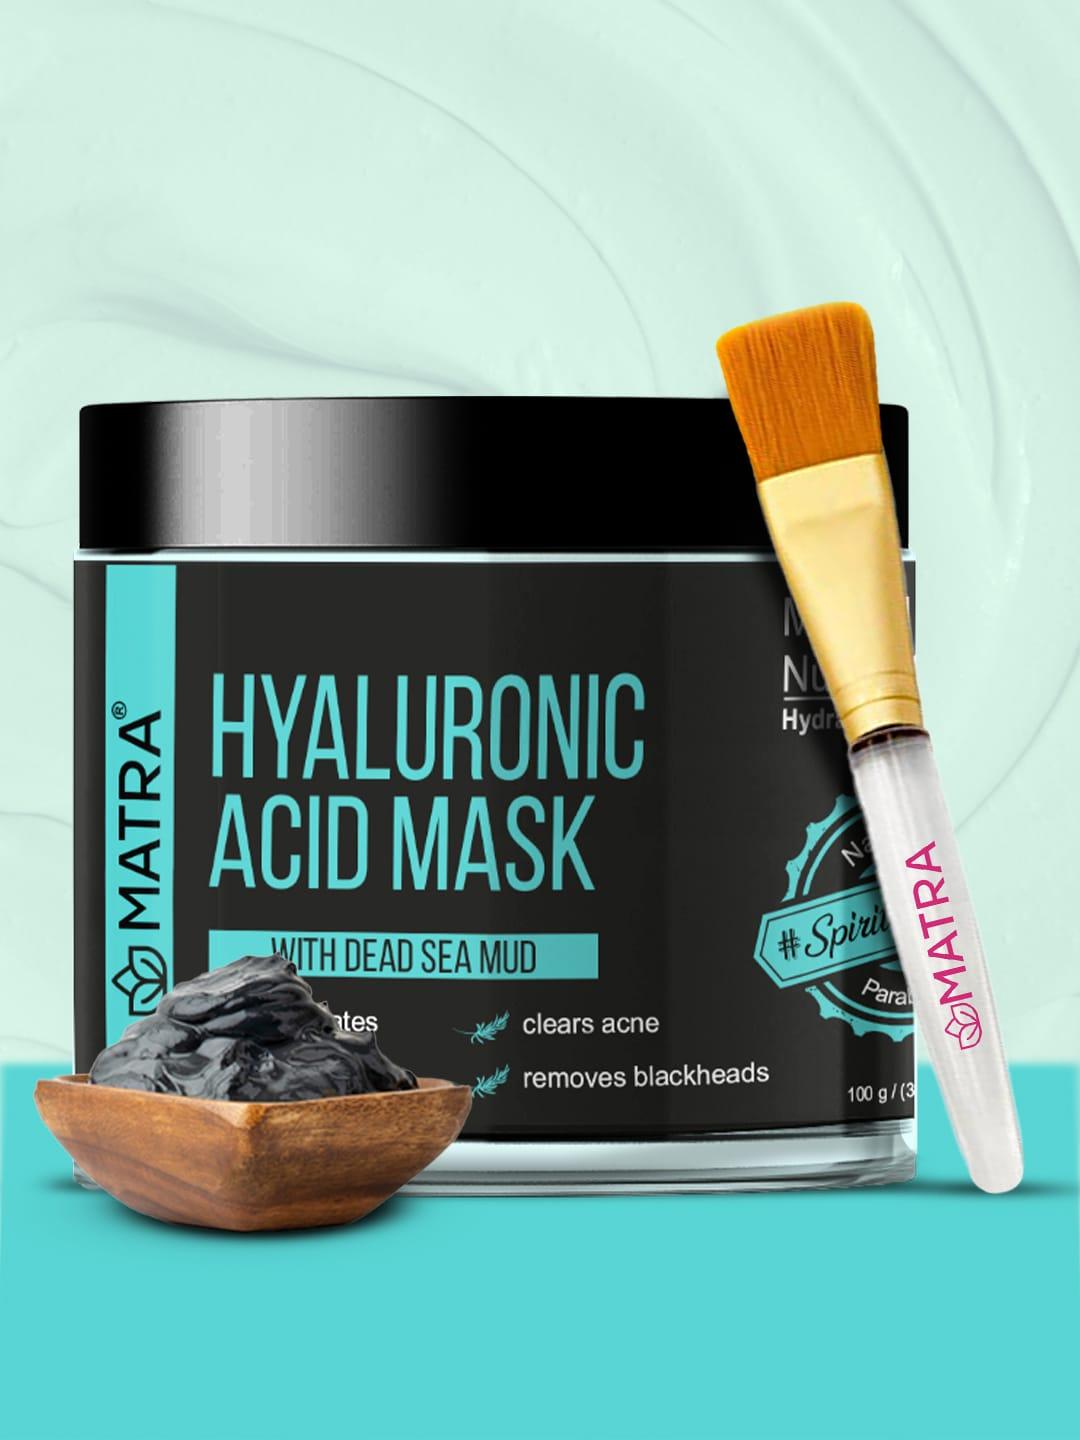 MATRA Dead Sea Mud Hyaluronic Acid Face Mask with Face Mask Brush - 100 g